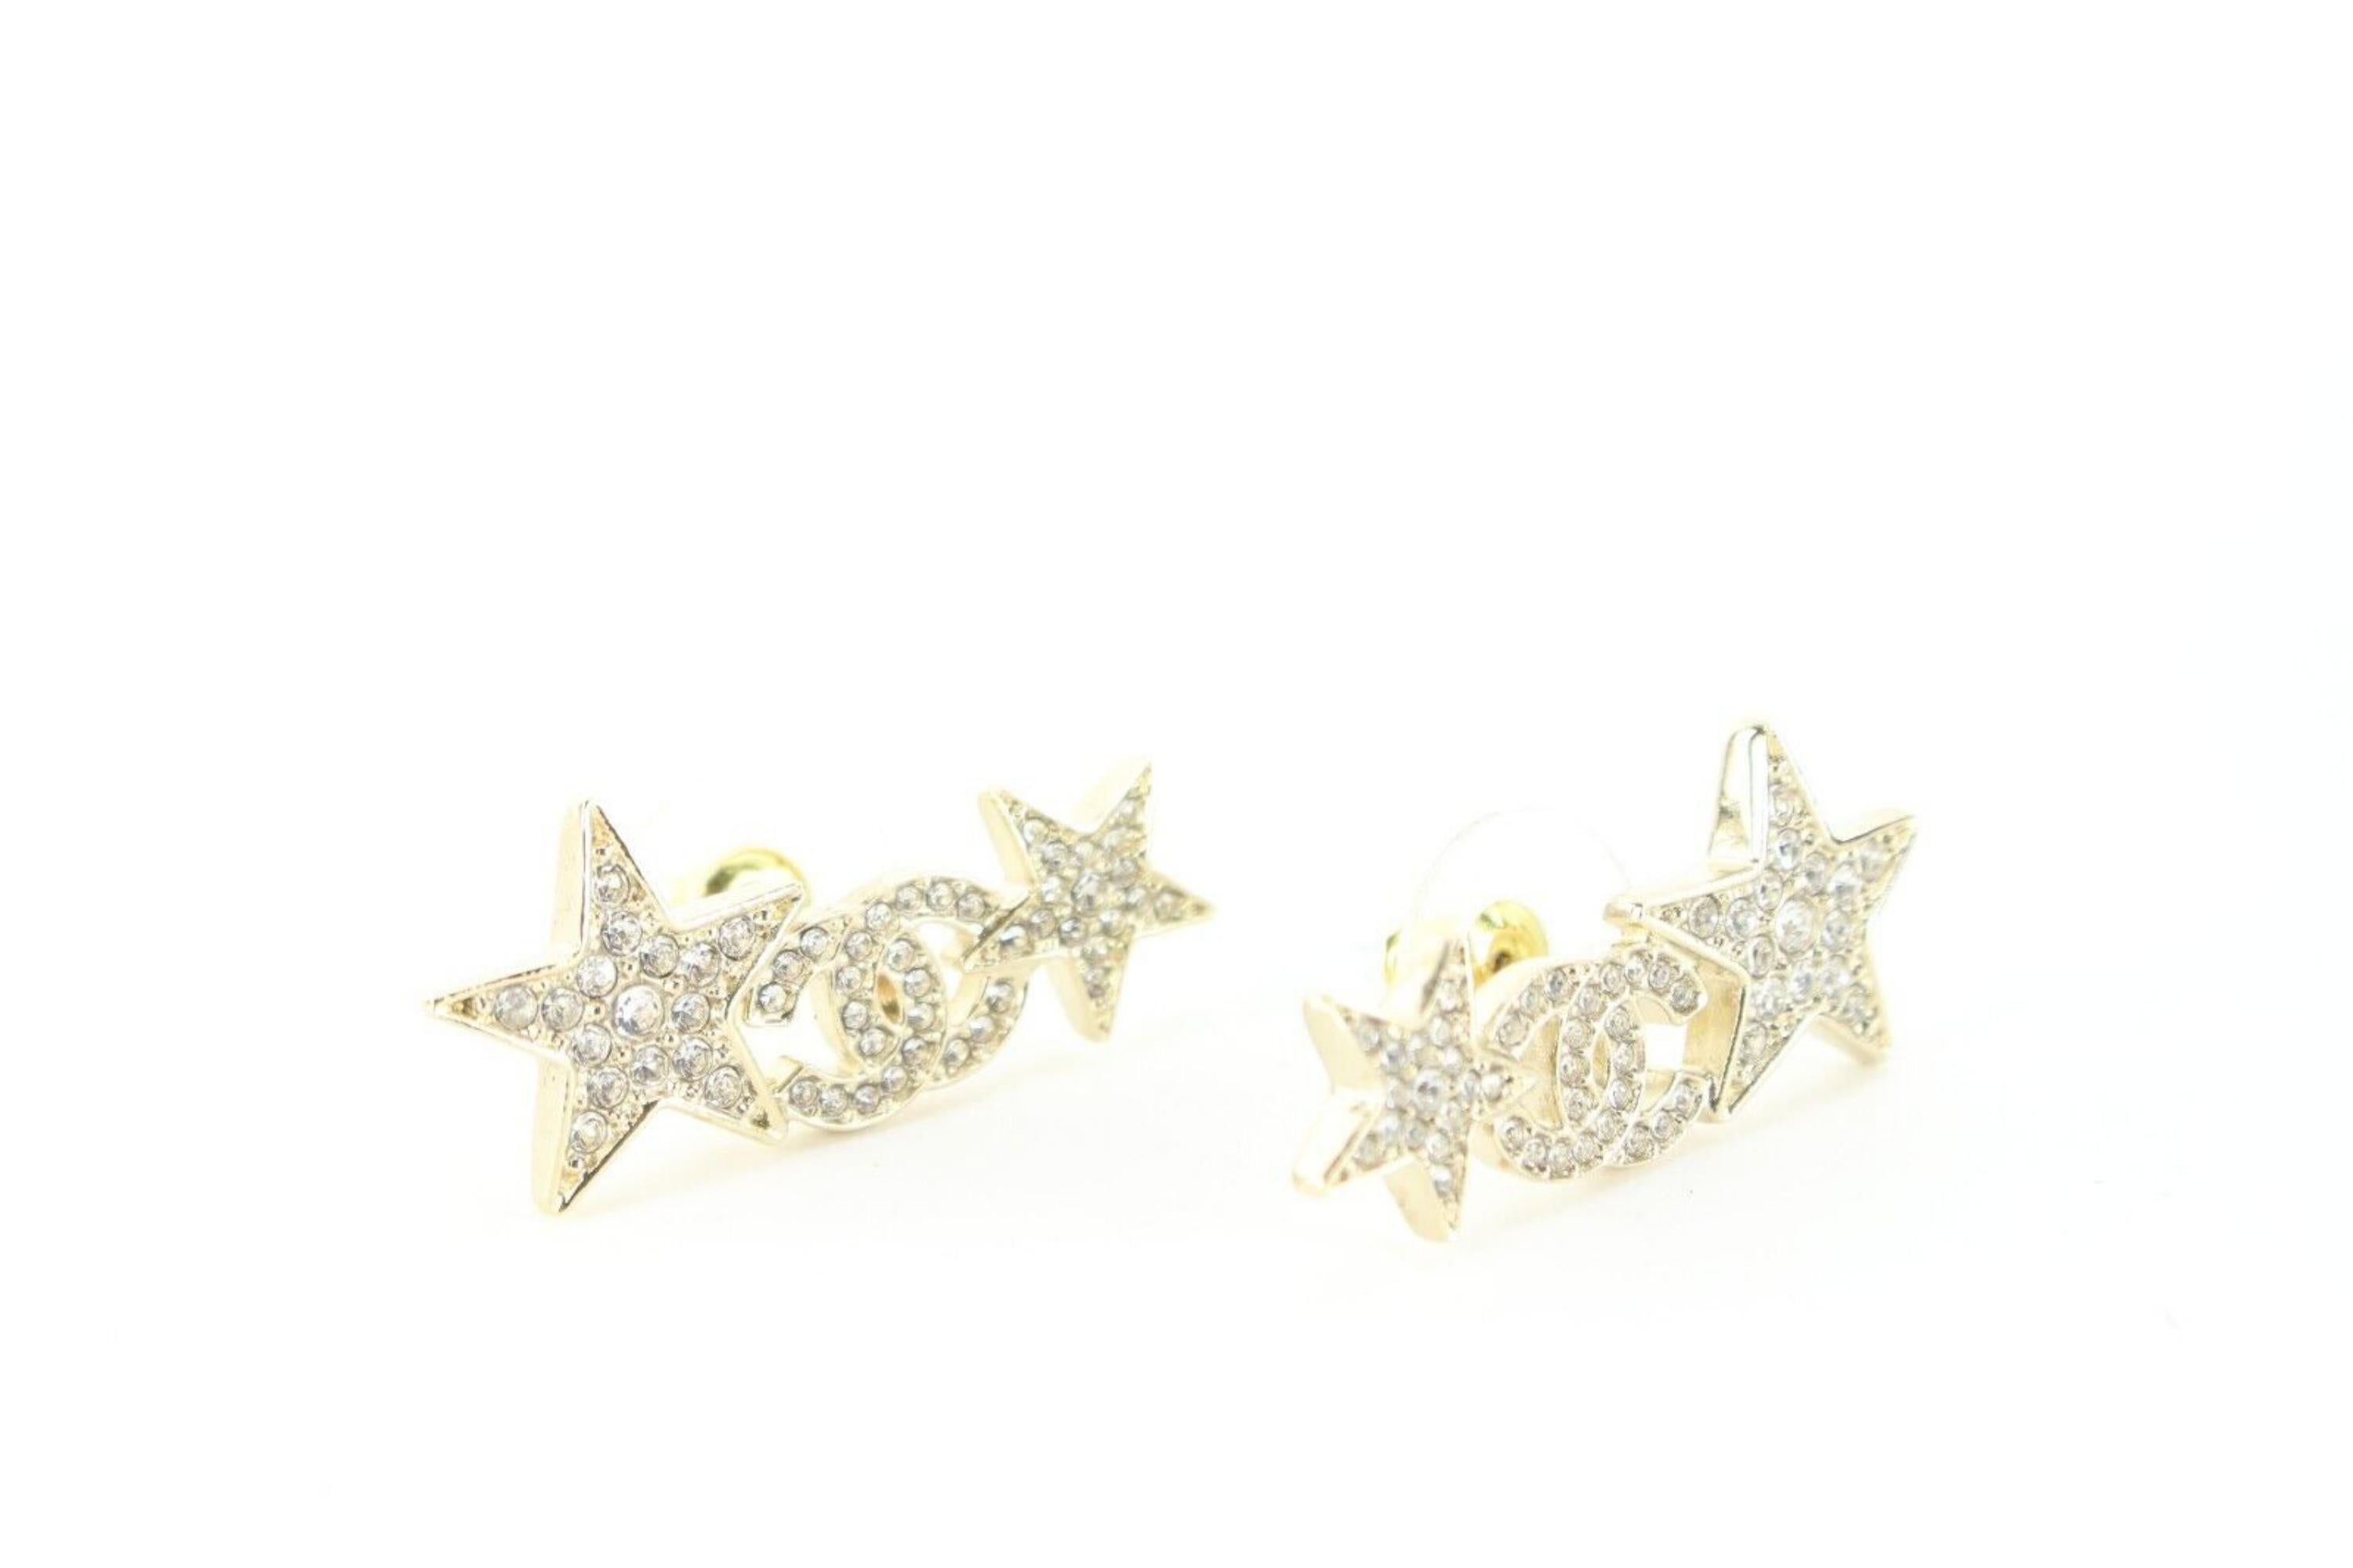 Chanel 23C Star CC Crystal Pierce Earrings 6CJ1229
Date Code/Serial Number: B23

Made In: Made in Italy

Measurements: Length:  1.5